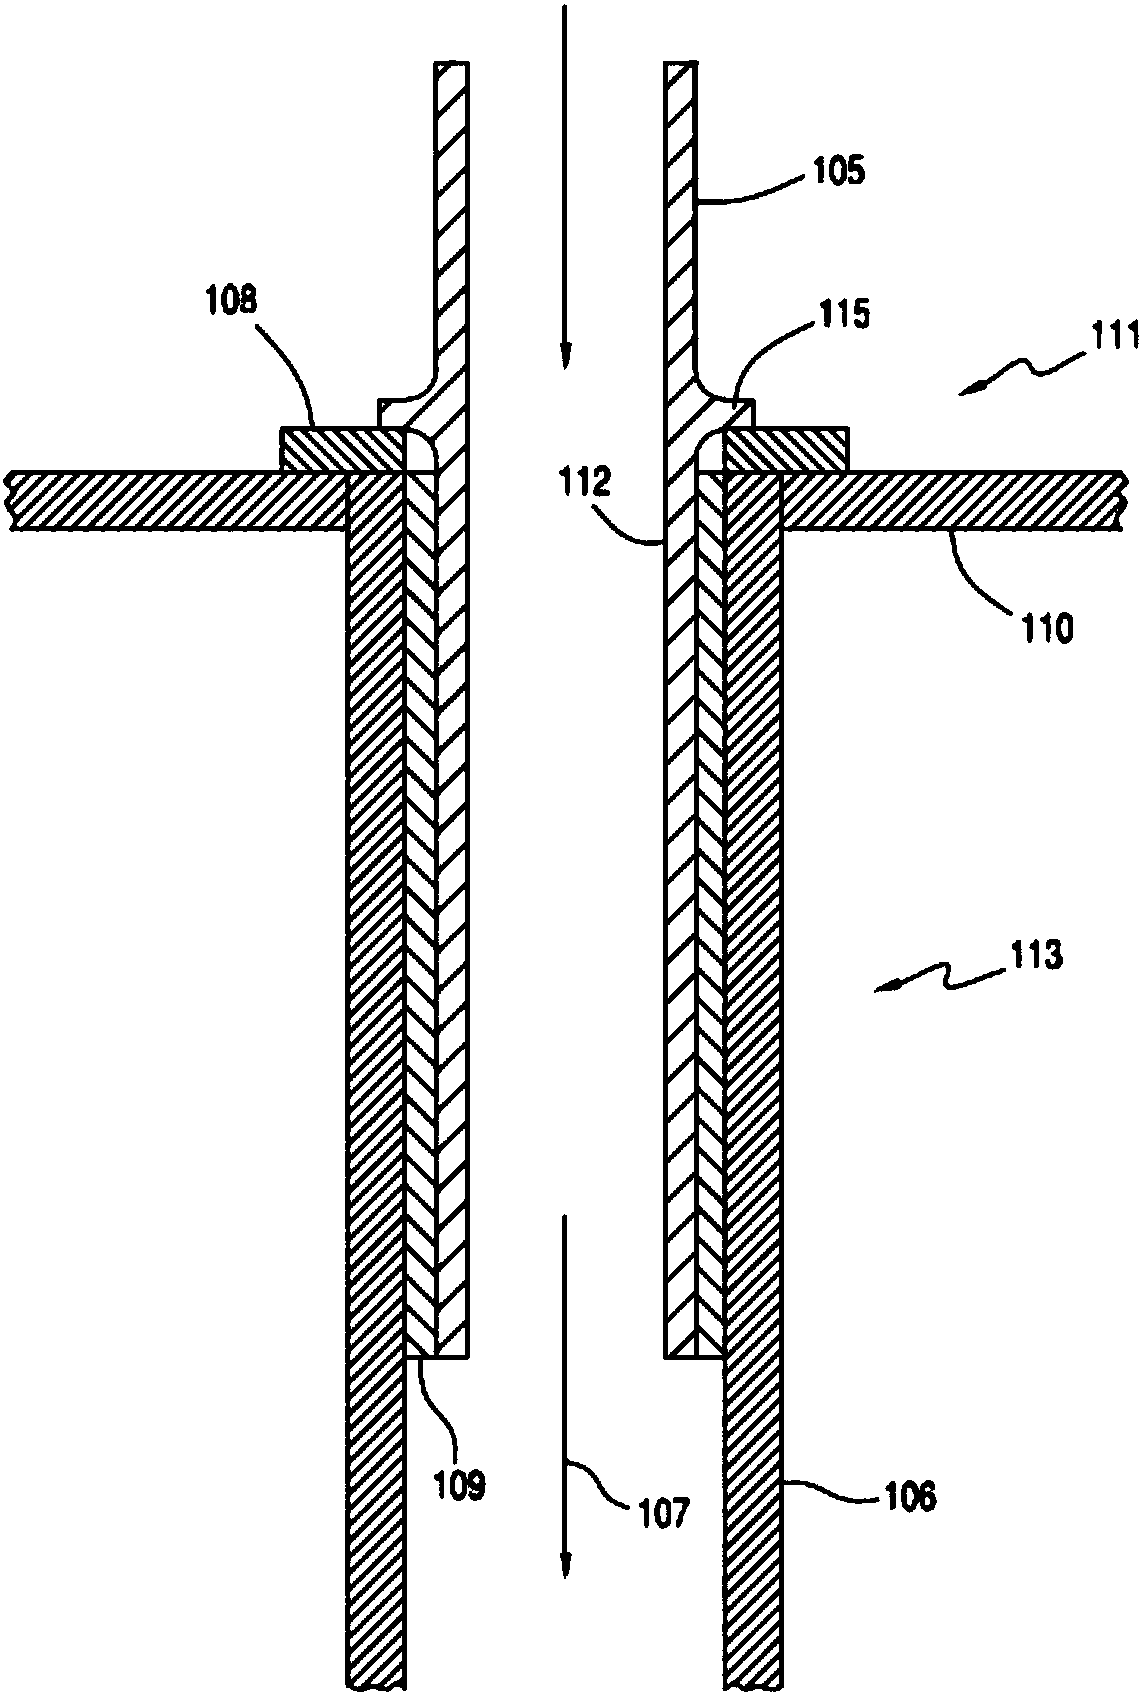 Method for stabilizing heat exchange tubes in the andrussow process